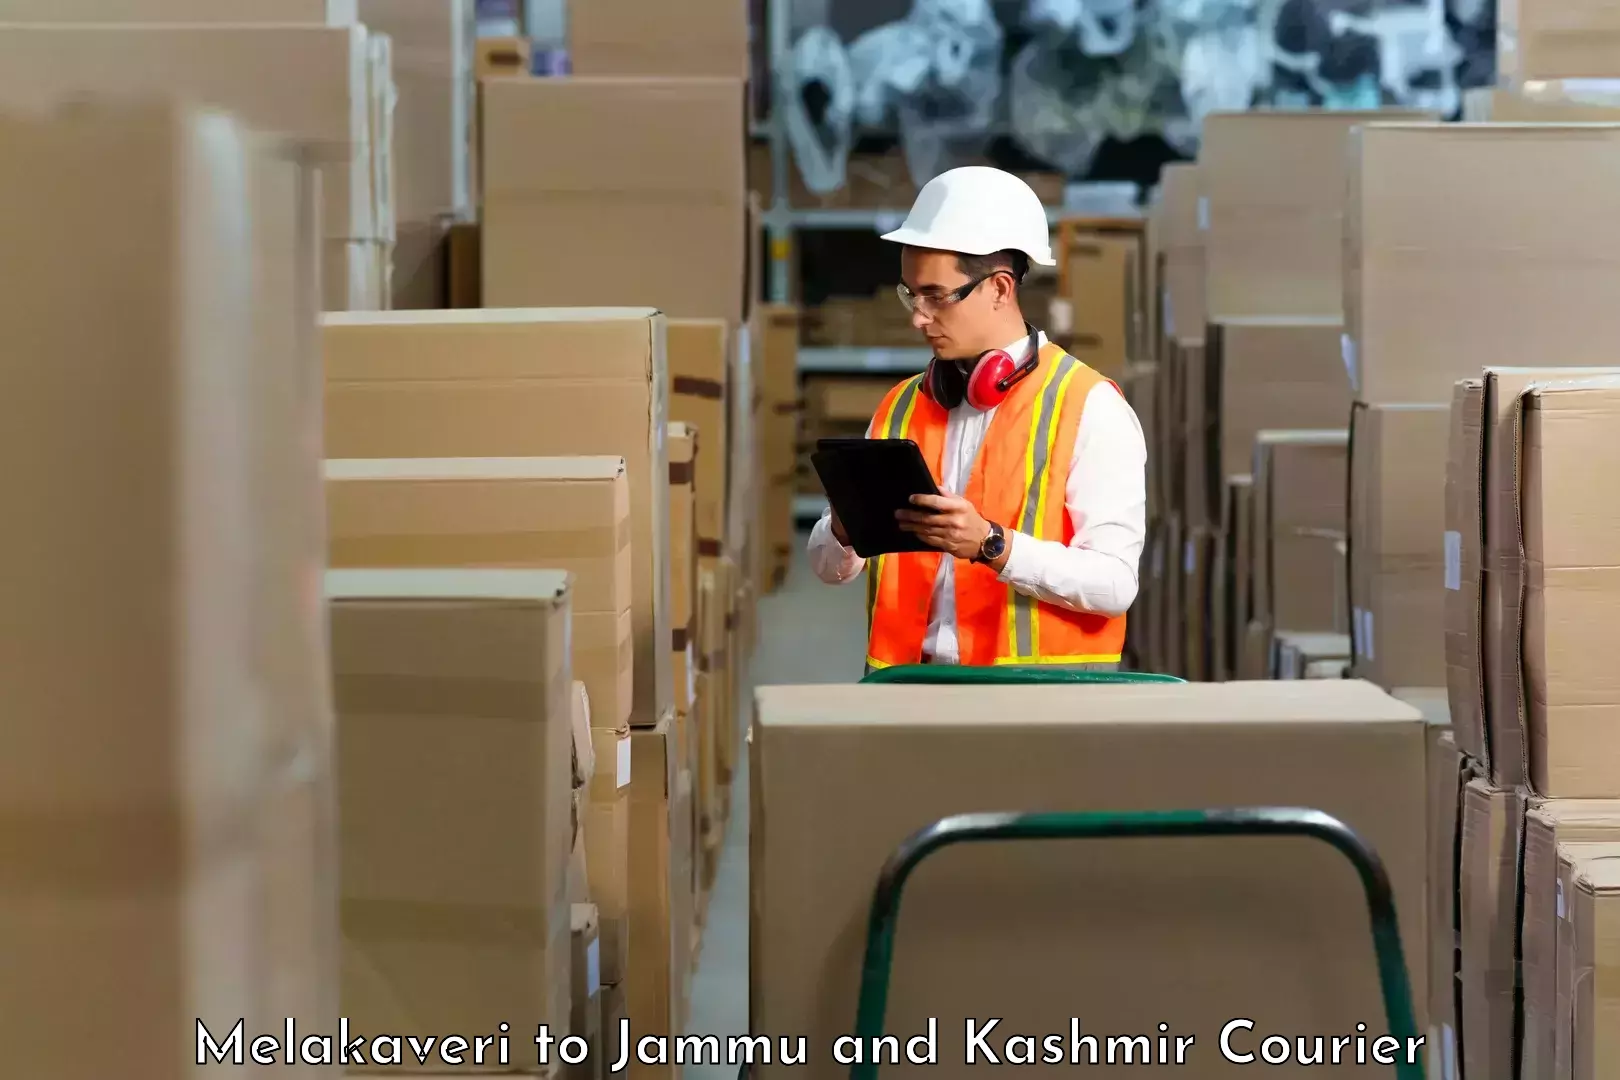 Next-day delivery options Melakaveri to Jammu and Kashmir